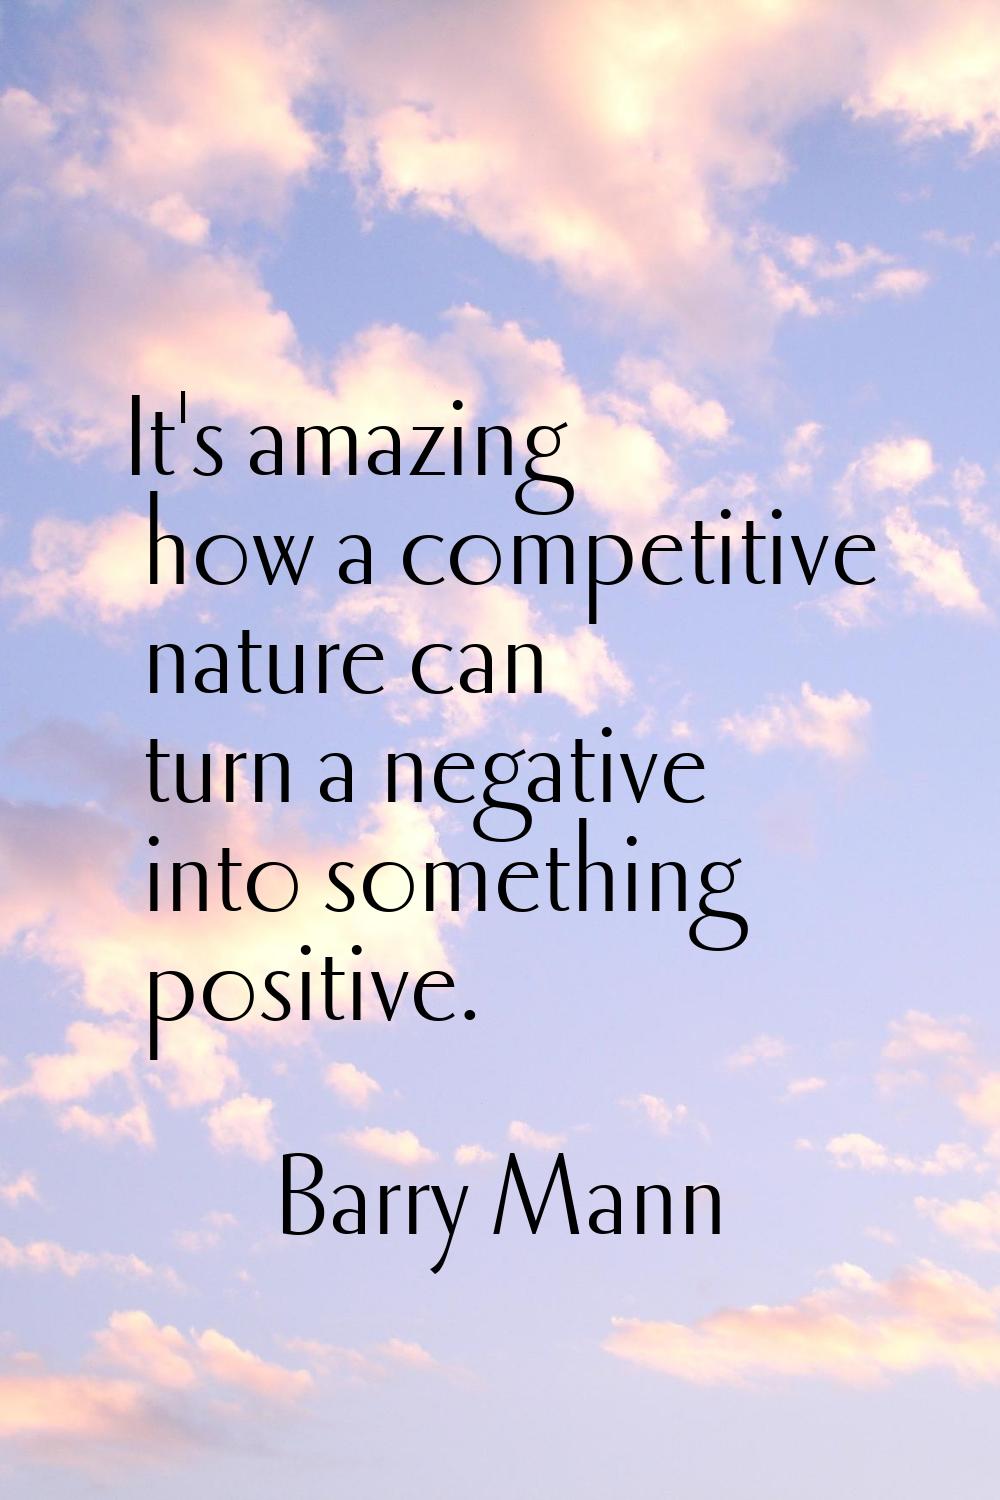 It's amazing how a competitive nature can turn a negative into something positive.